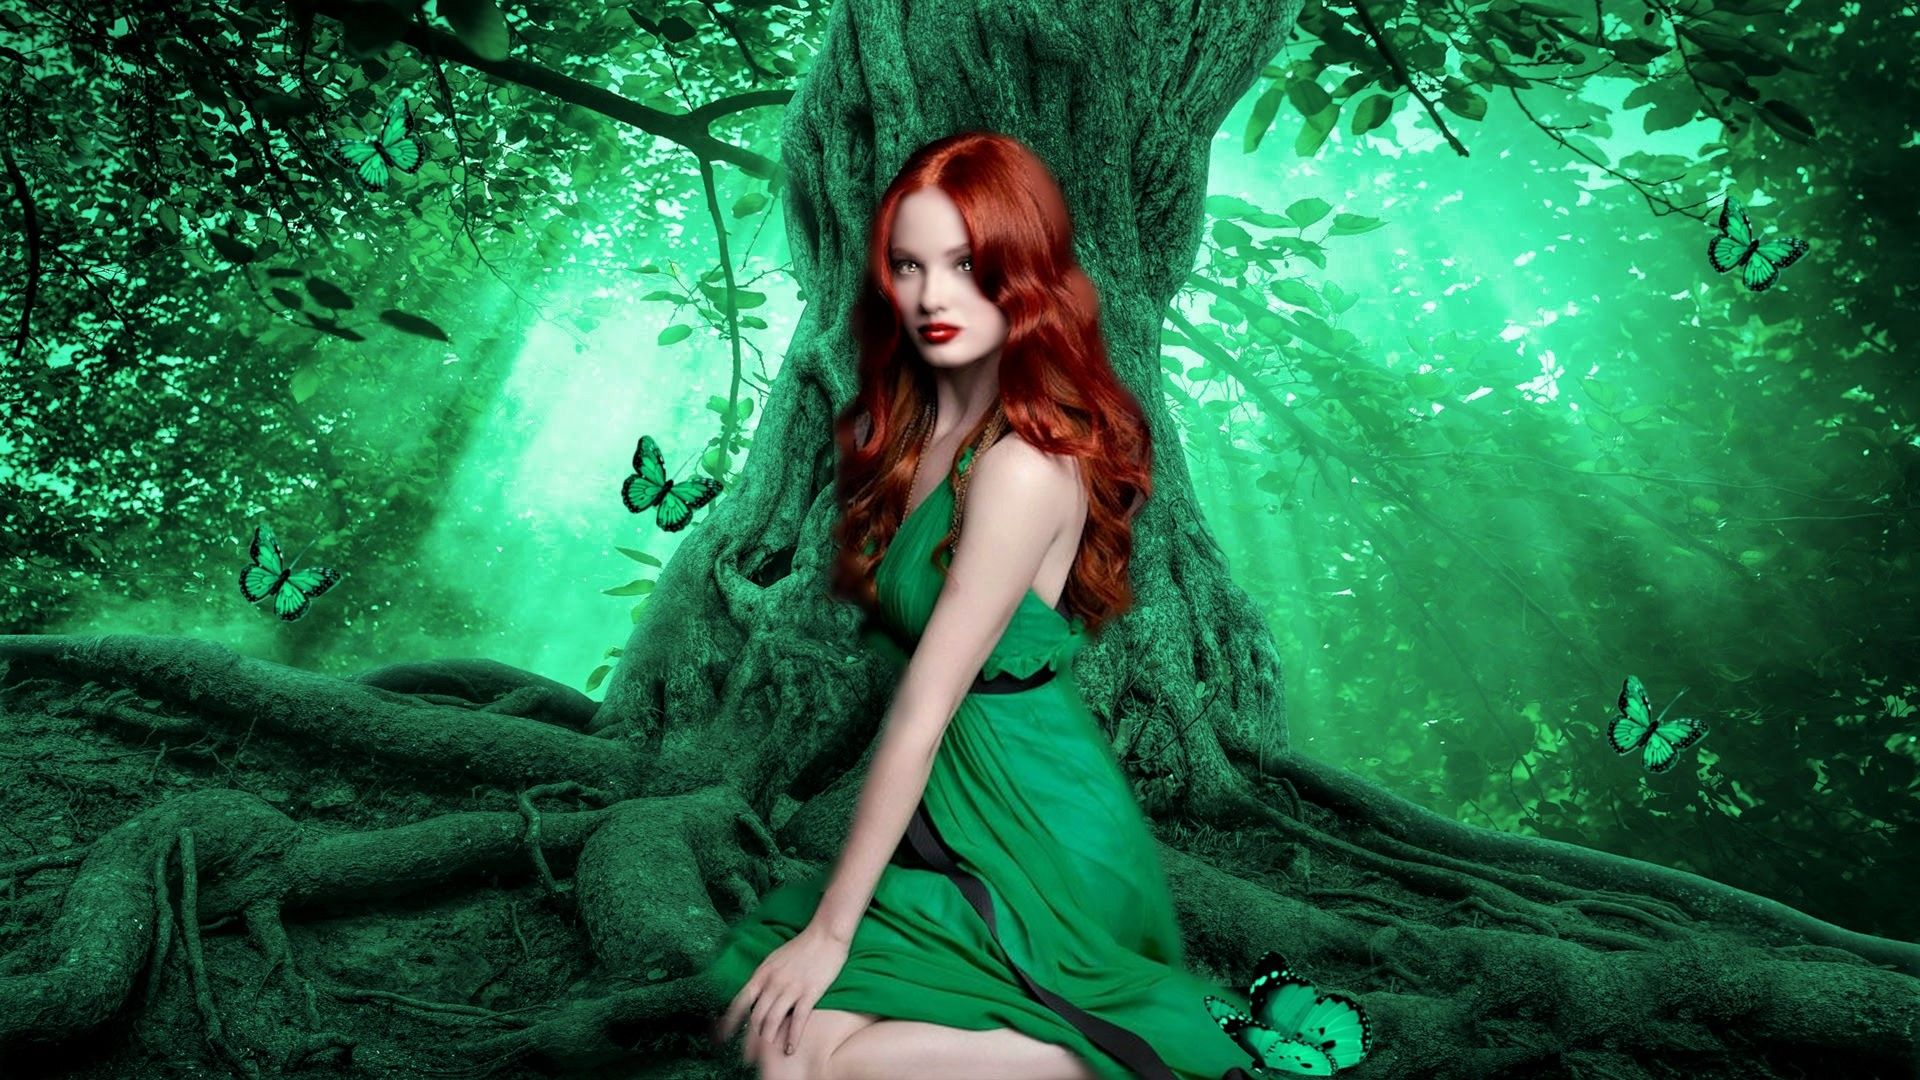 Fantasy Girl in Green Forest HD Wallpaper. Background Image